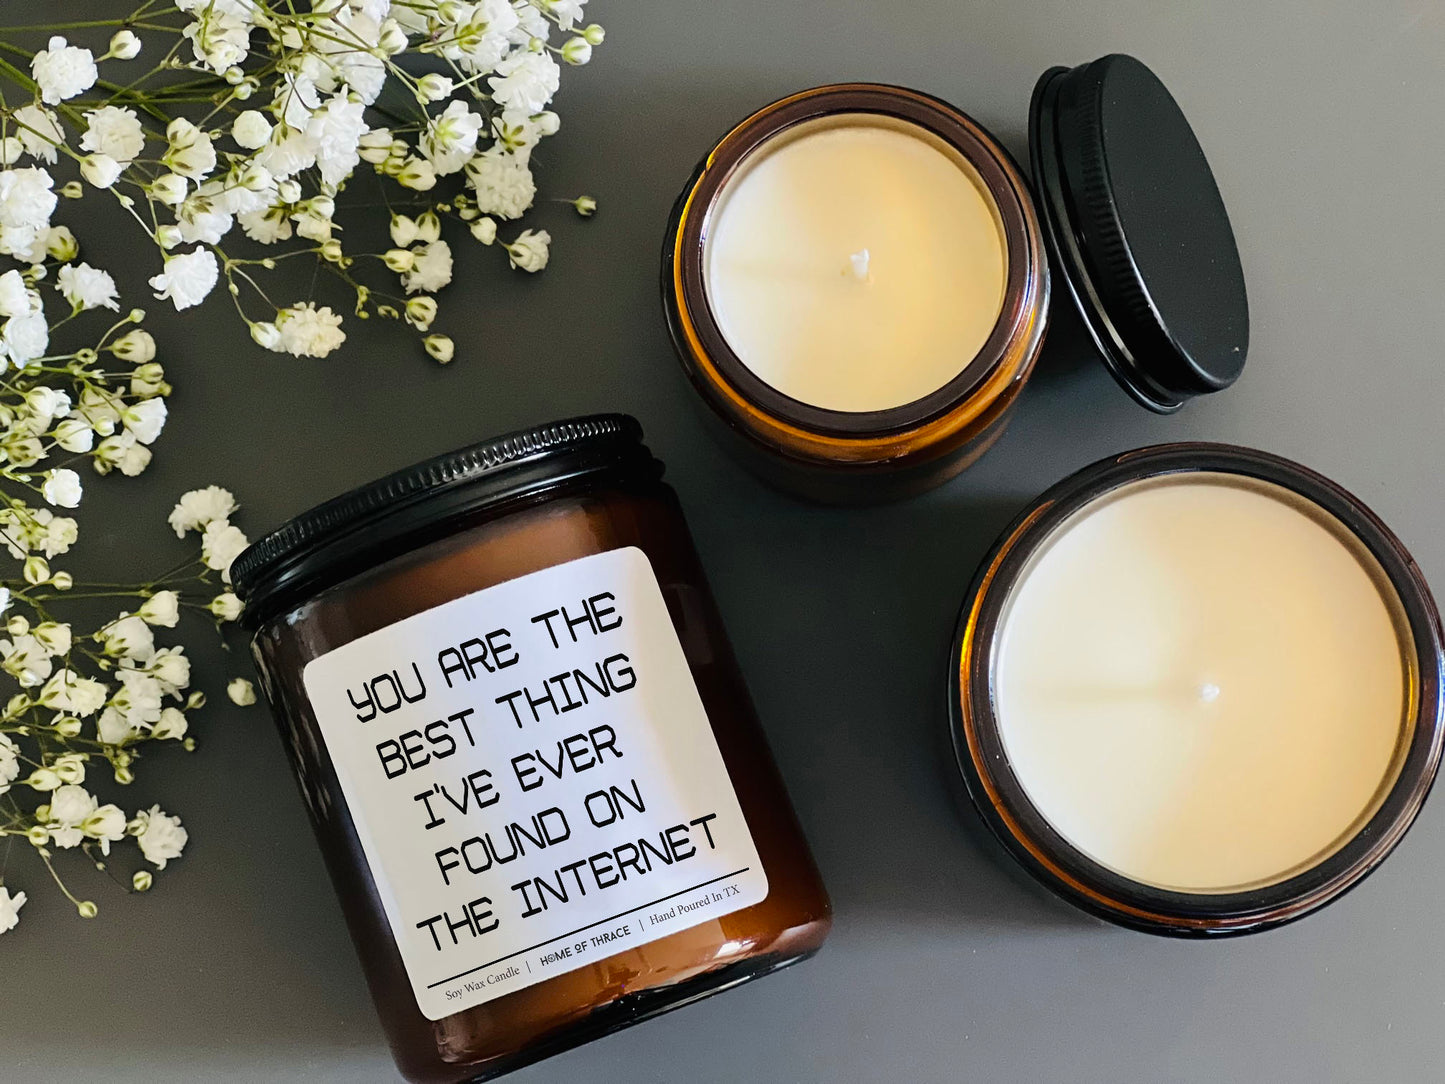 Best Thing On the Internet Anniversary Gift Candle for him, Boyfriend